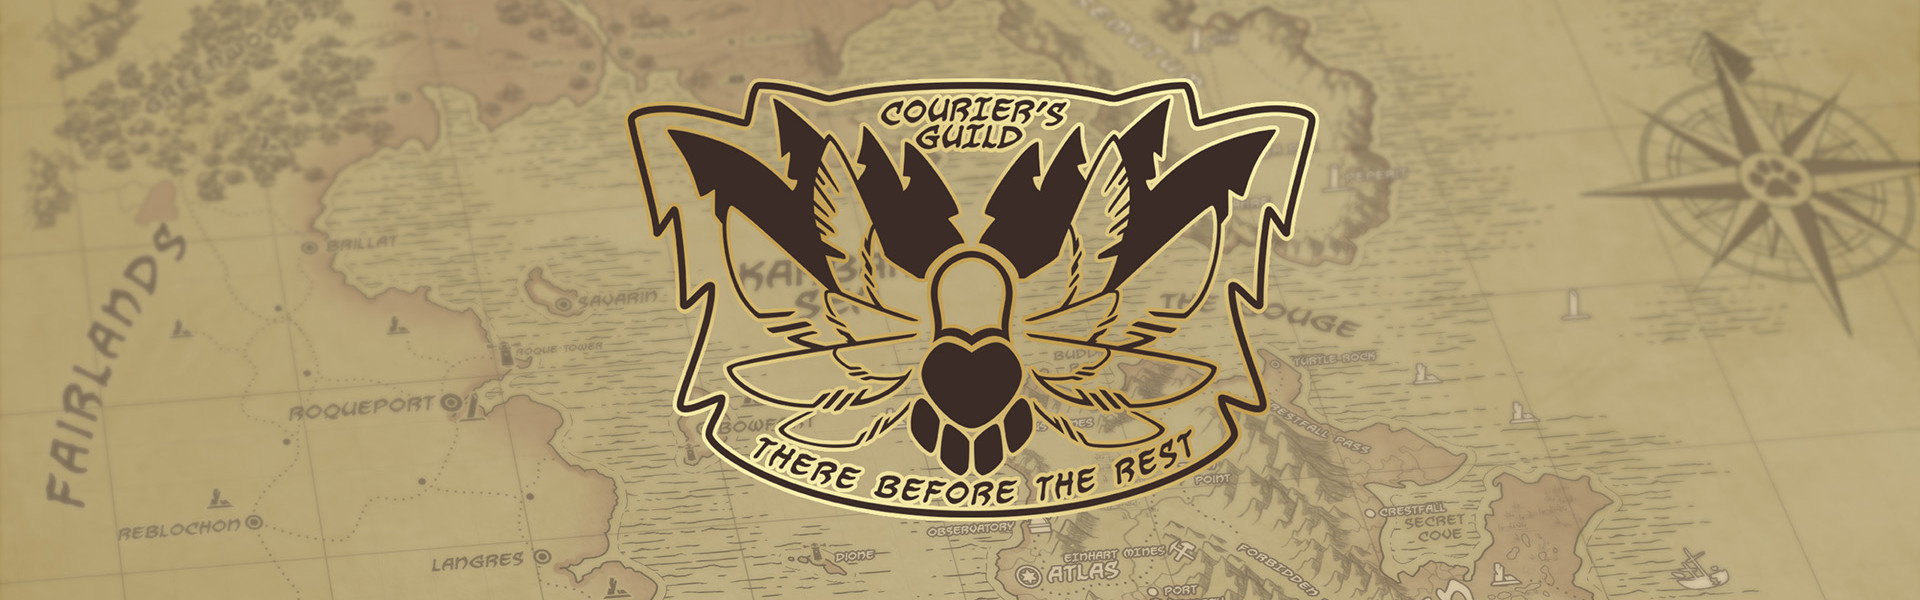 The Courier's Guild, a barebones confederation of local offices, trade routes, carriage and mantis travel services, and other loosely affiliated package storing and handoff groups that handle the majority of the land-based delivery needs of The Cross.